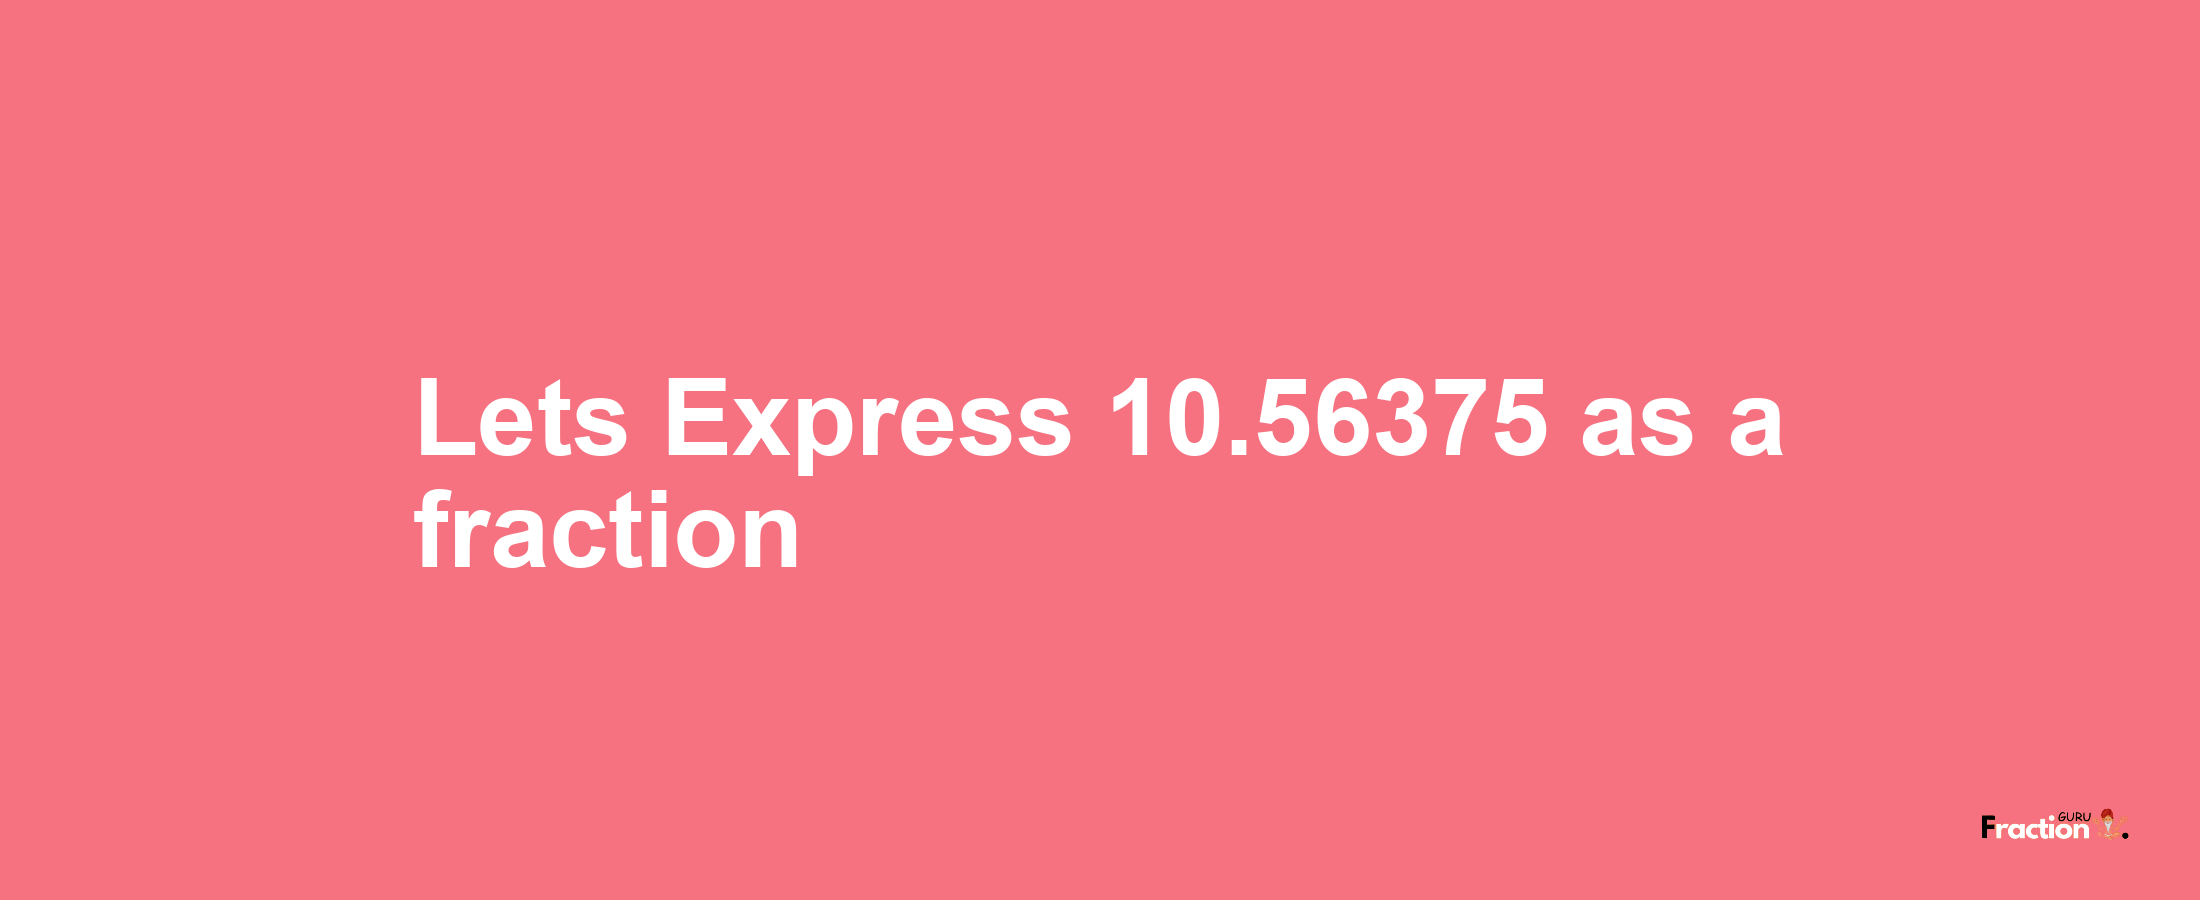 Lets Express 10.56375 as afraction